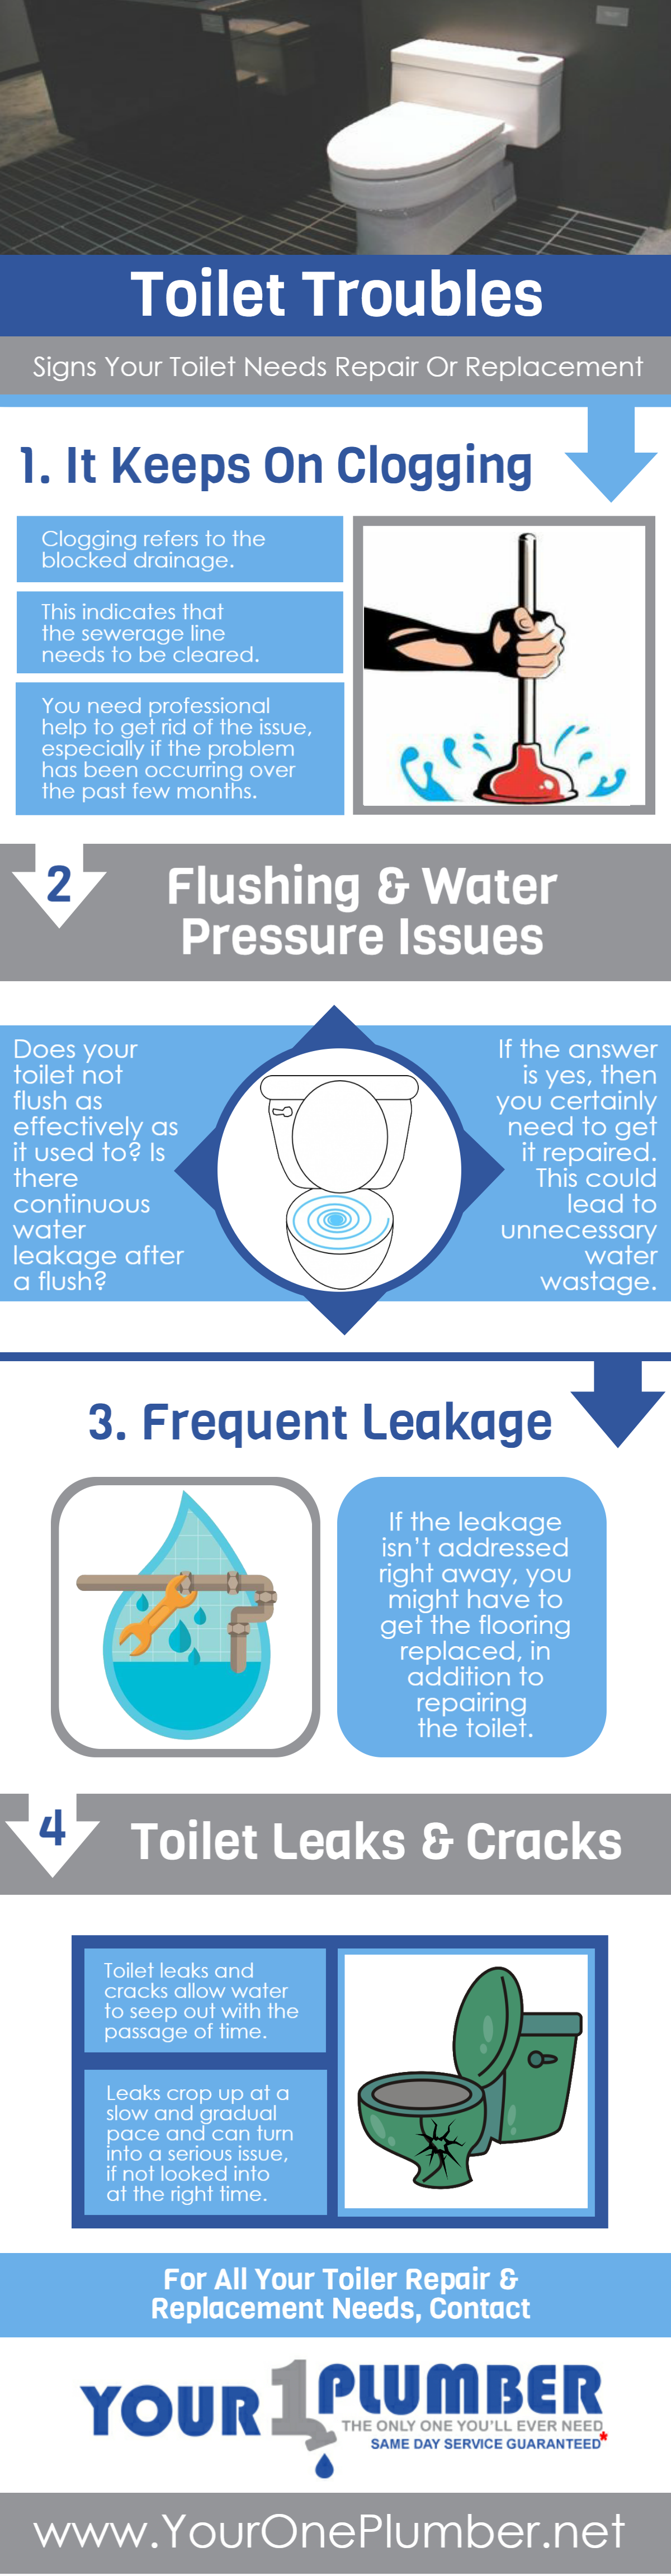 Toilet Troubles - Signs Your Toilet Needs Repair or Replacement 